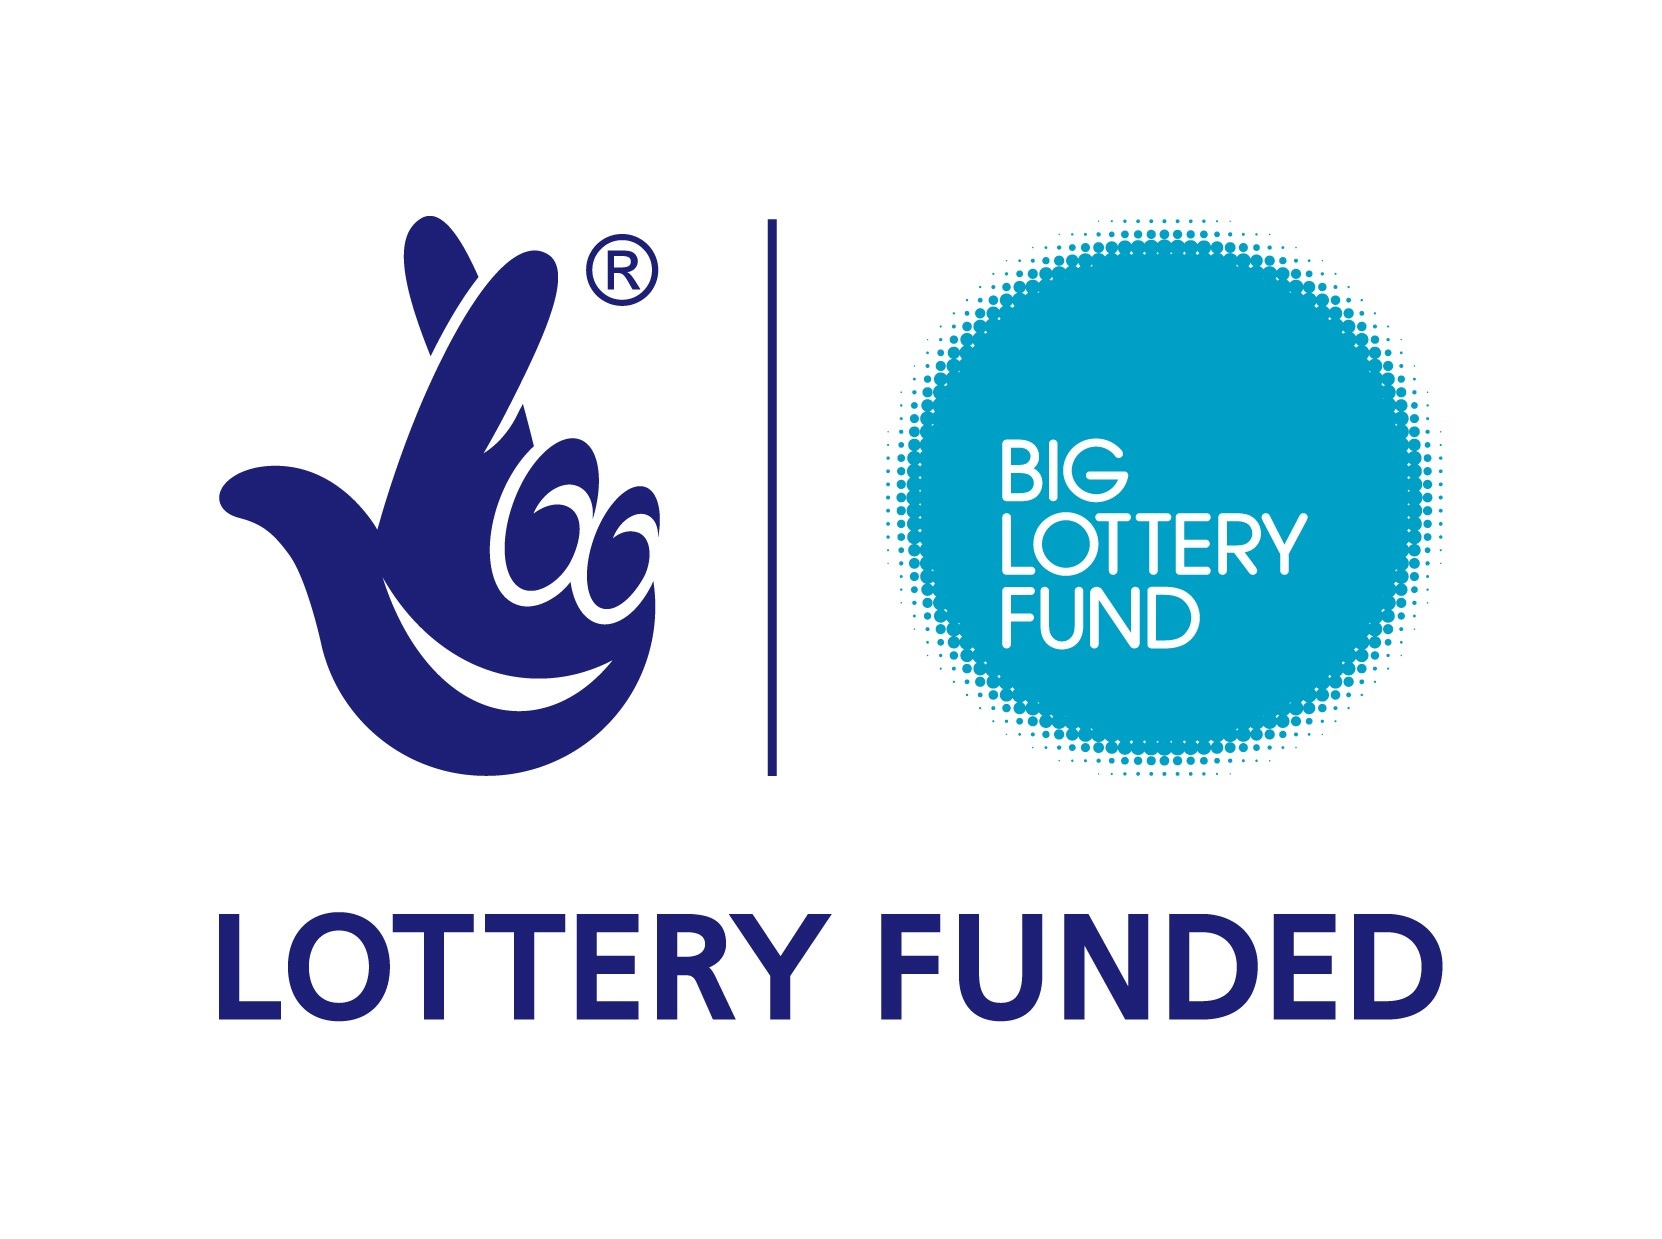 More information about "Synergy FM 6k Lottery Grant"